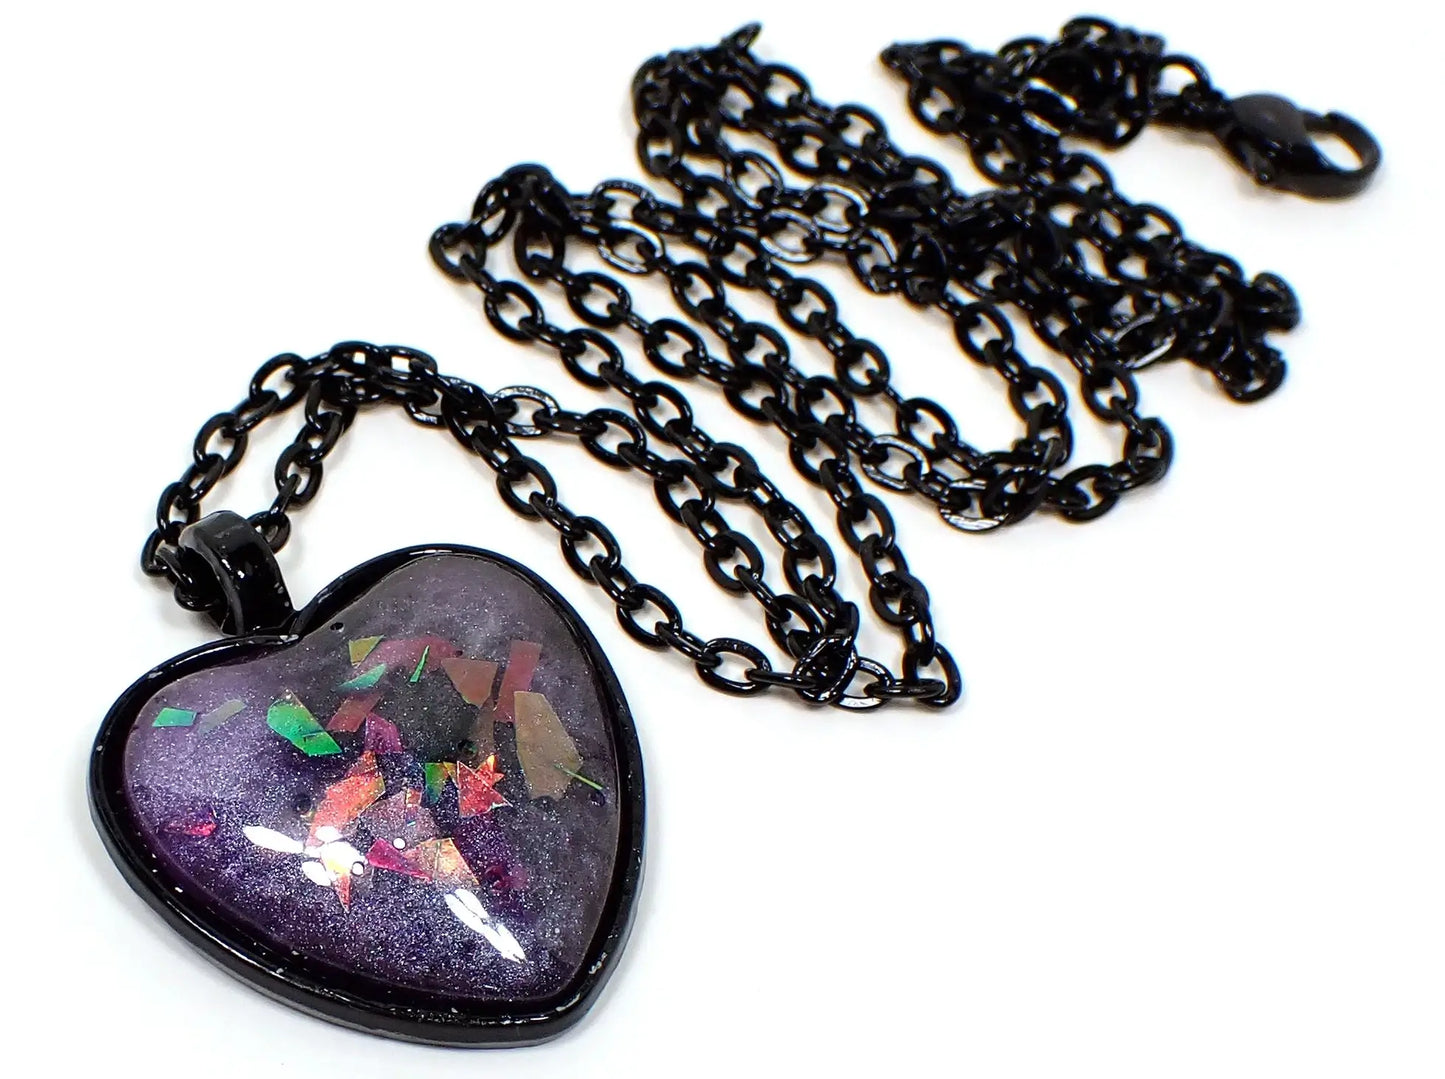 Handmade Purple Resin Black Heart Pendant Necklace with Color Shift Iridescent Glitter, Goth Emo Jewelry